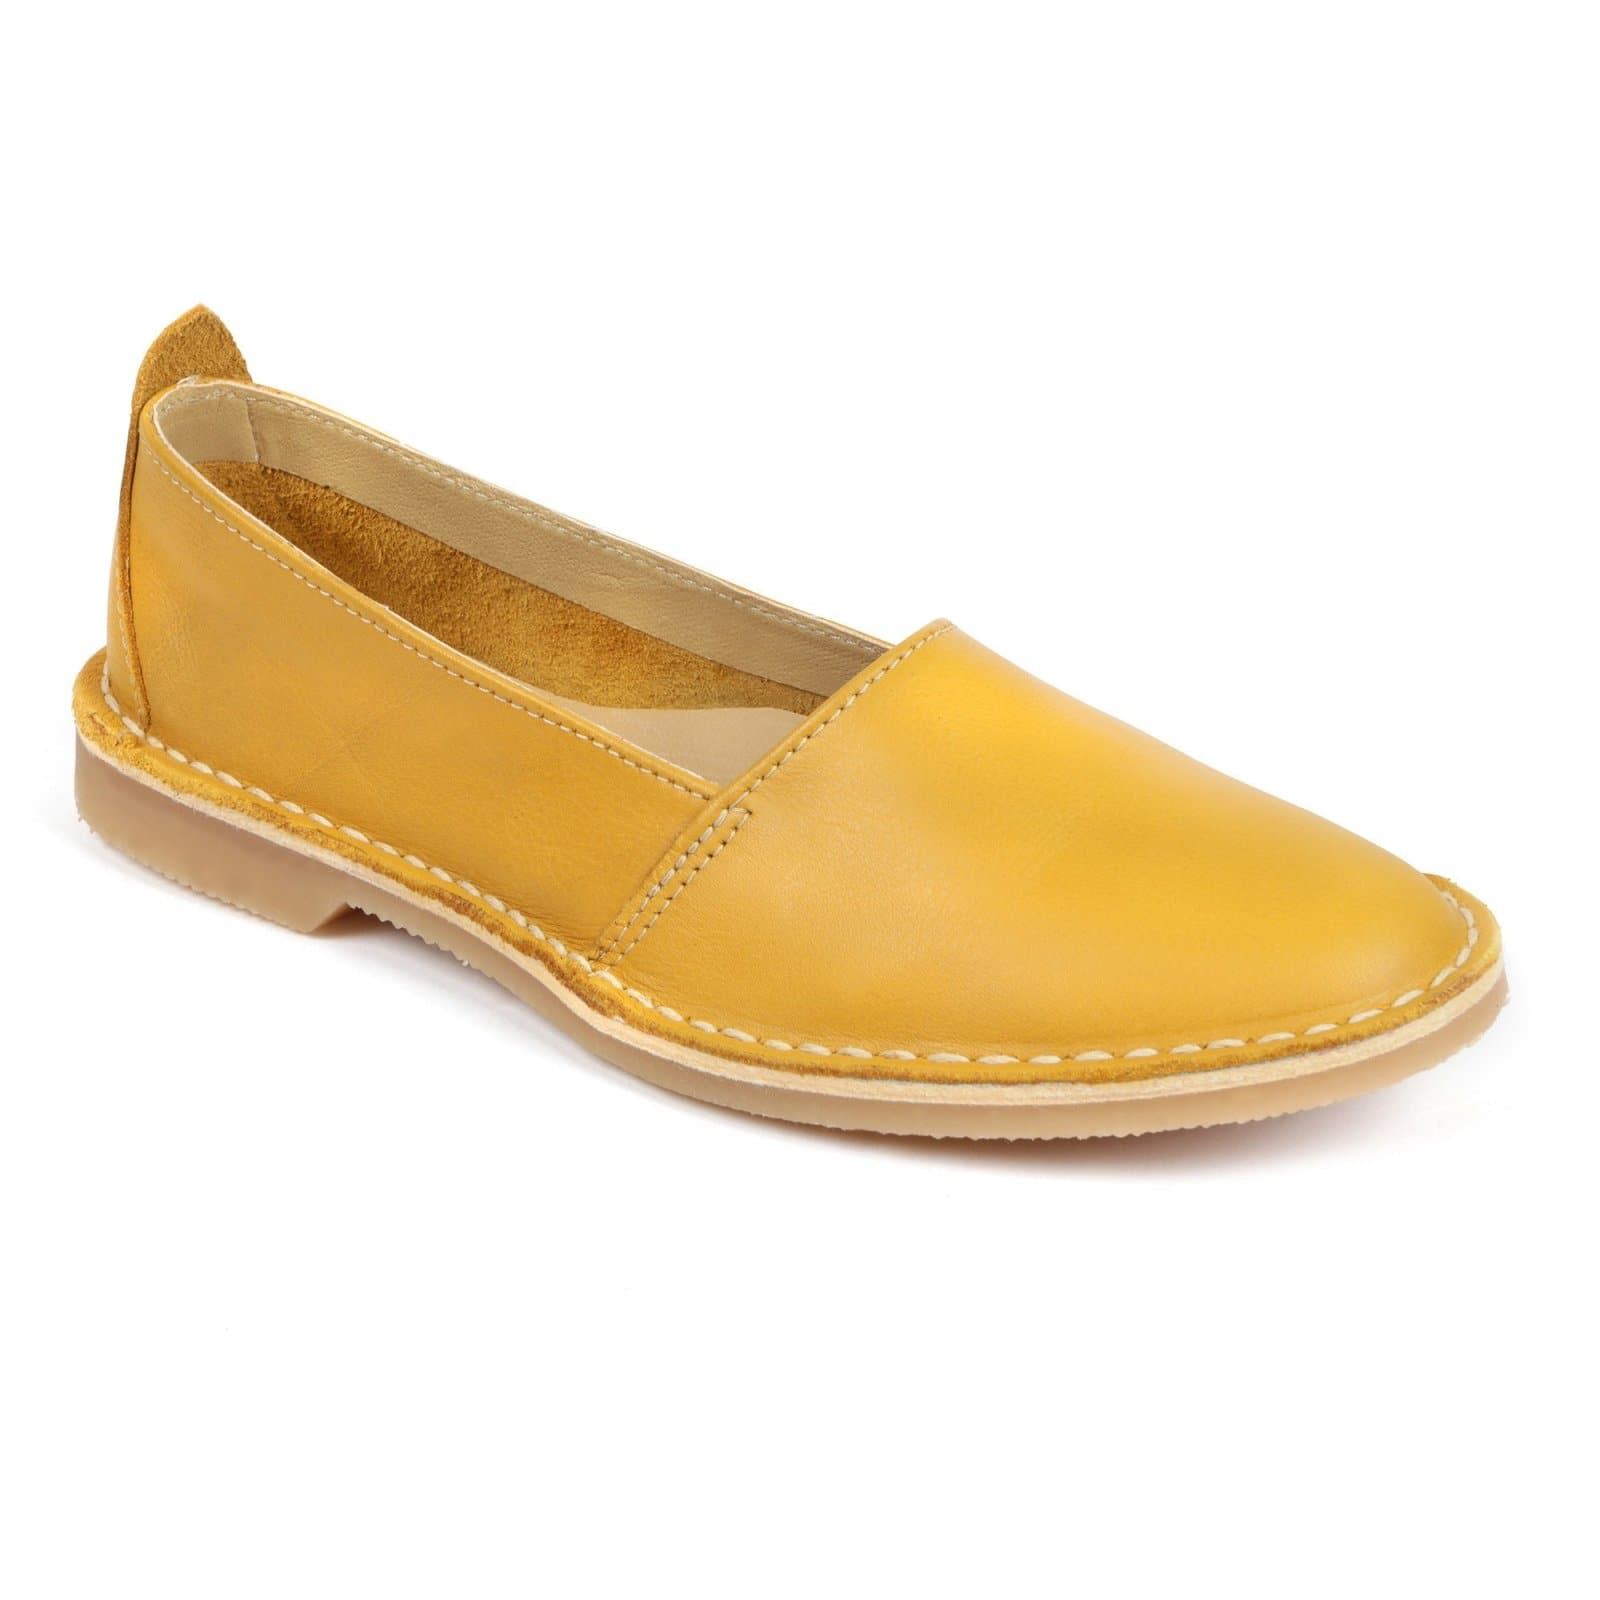 A-Cut Espadrille Premium Leather Summer Slip-on - Freestyle SA Proudly local leather boots veldskoens vellies leather shoes suede veldskoens